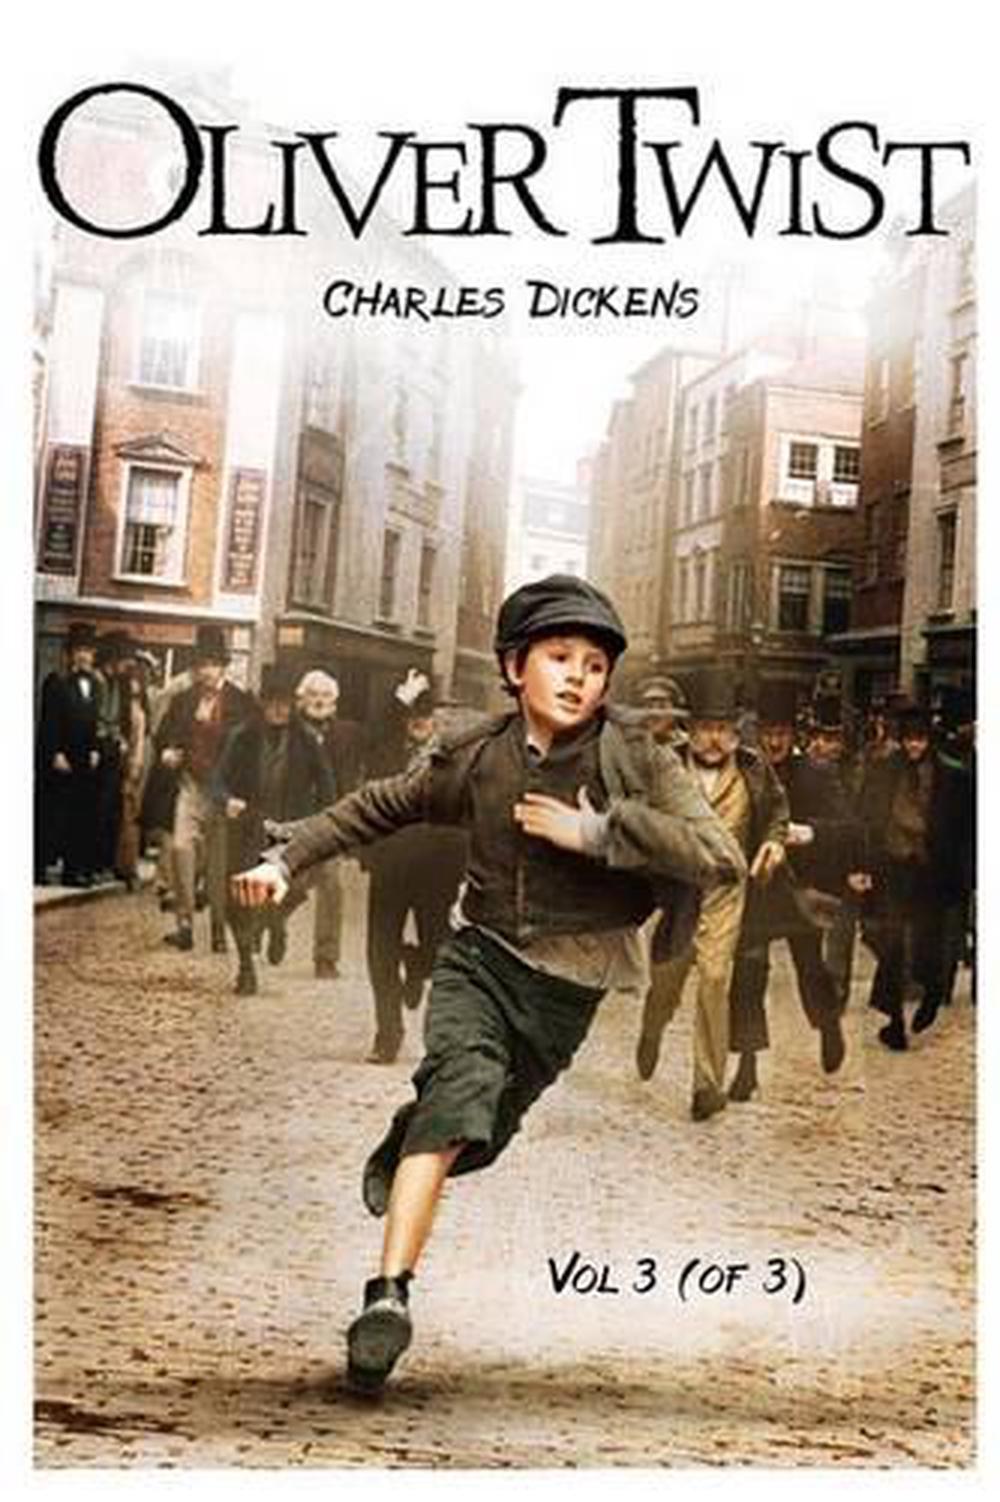 what is the book review of oliver twist